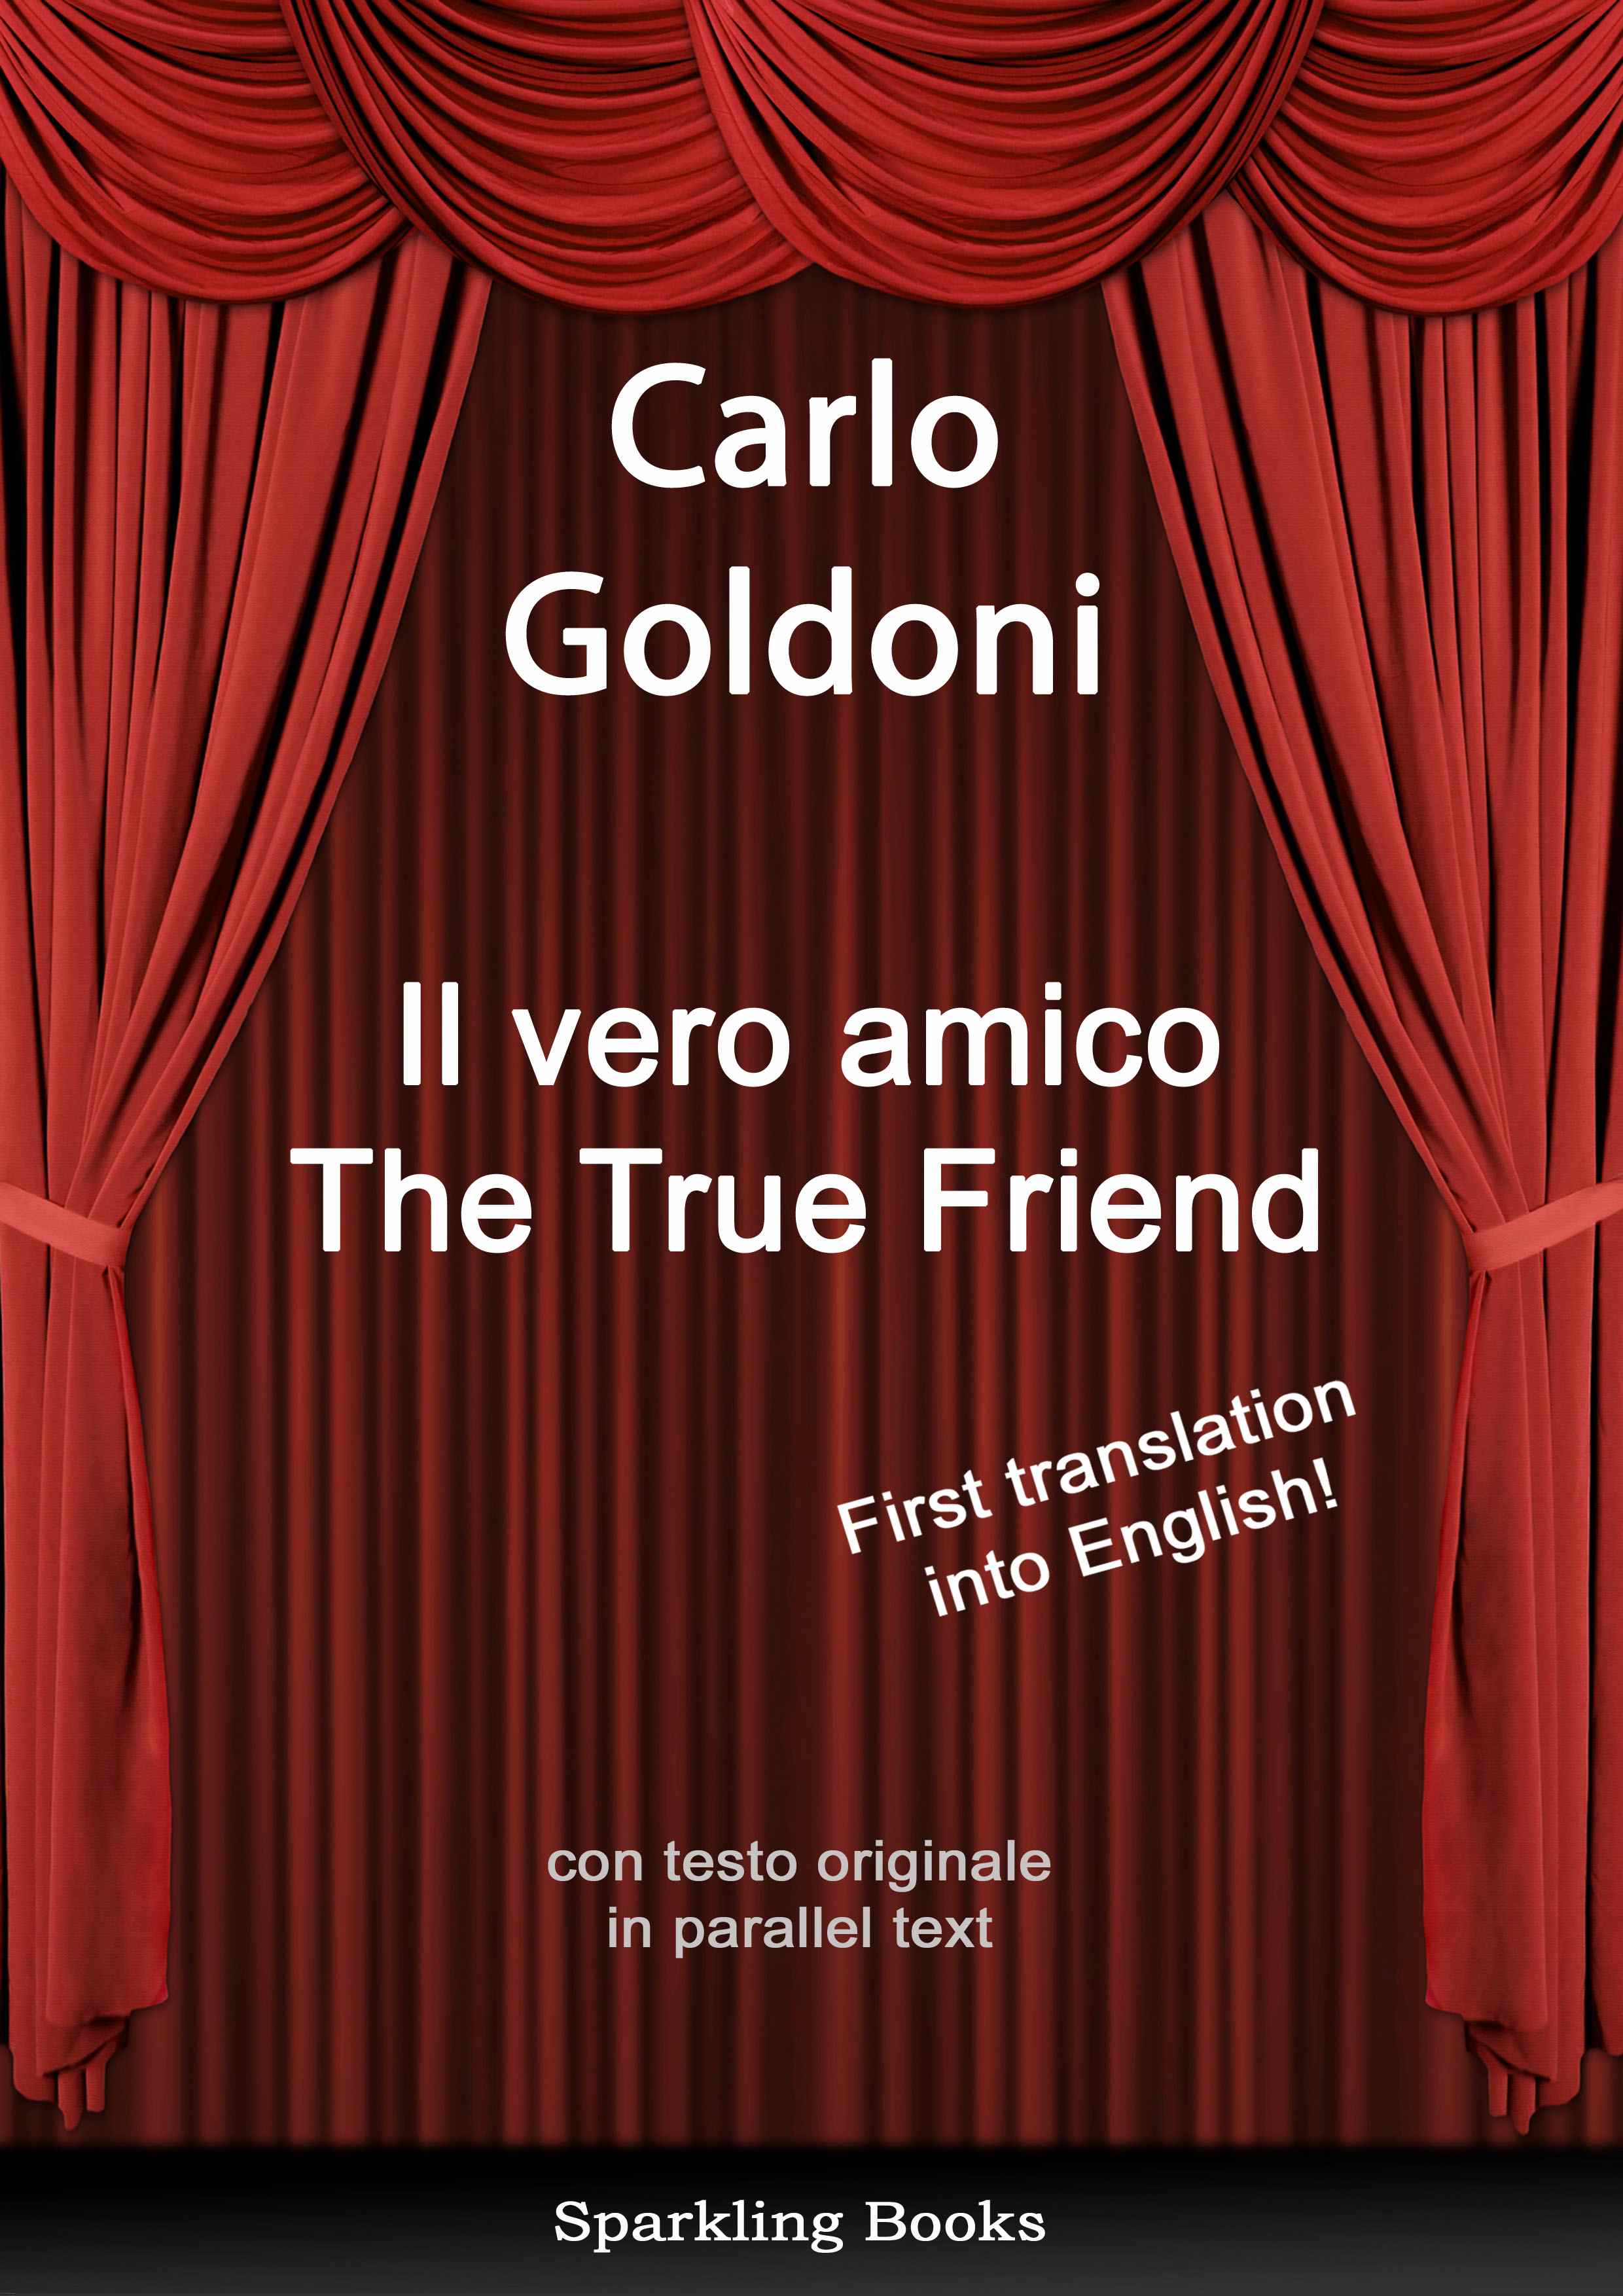 The True Friend, by Carlo Goldoni, published by Sparkling Books